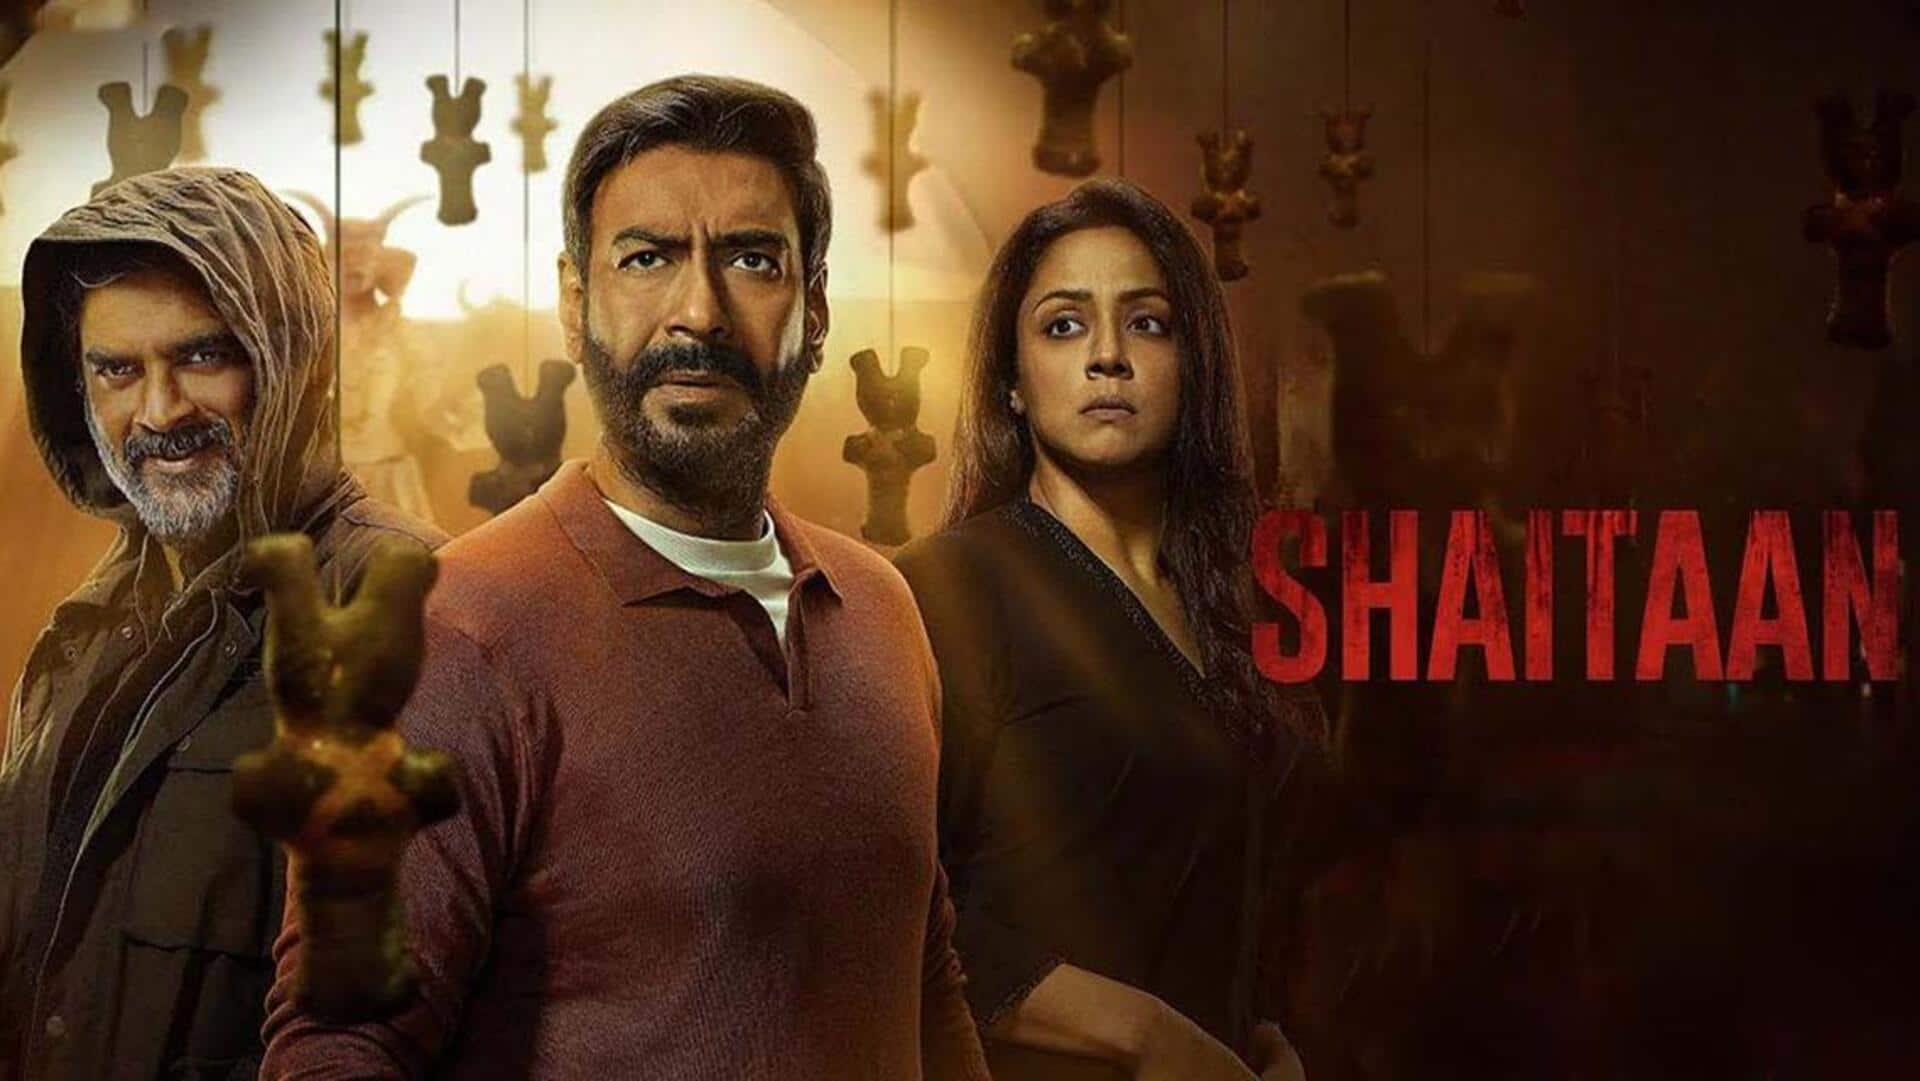 Box office collection: 'Shaitaan' to bow out of theaters soon